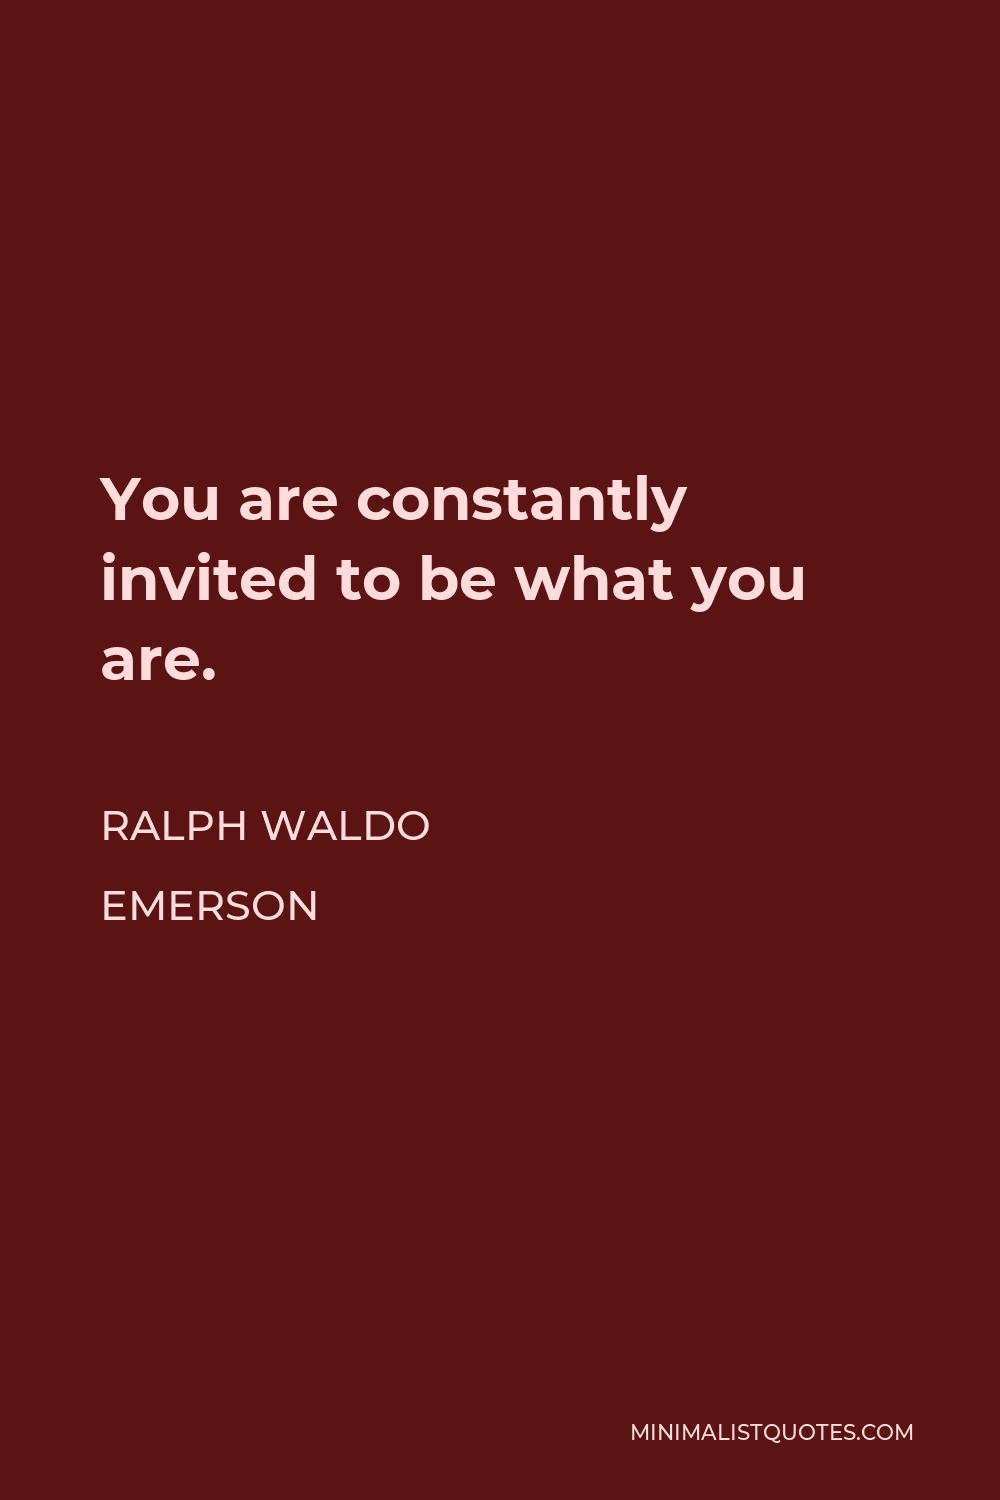 Ralph Waldo Emerson Quote - You are constantly invited to be what you are.